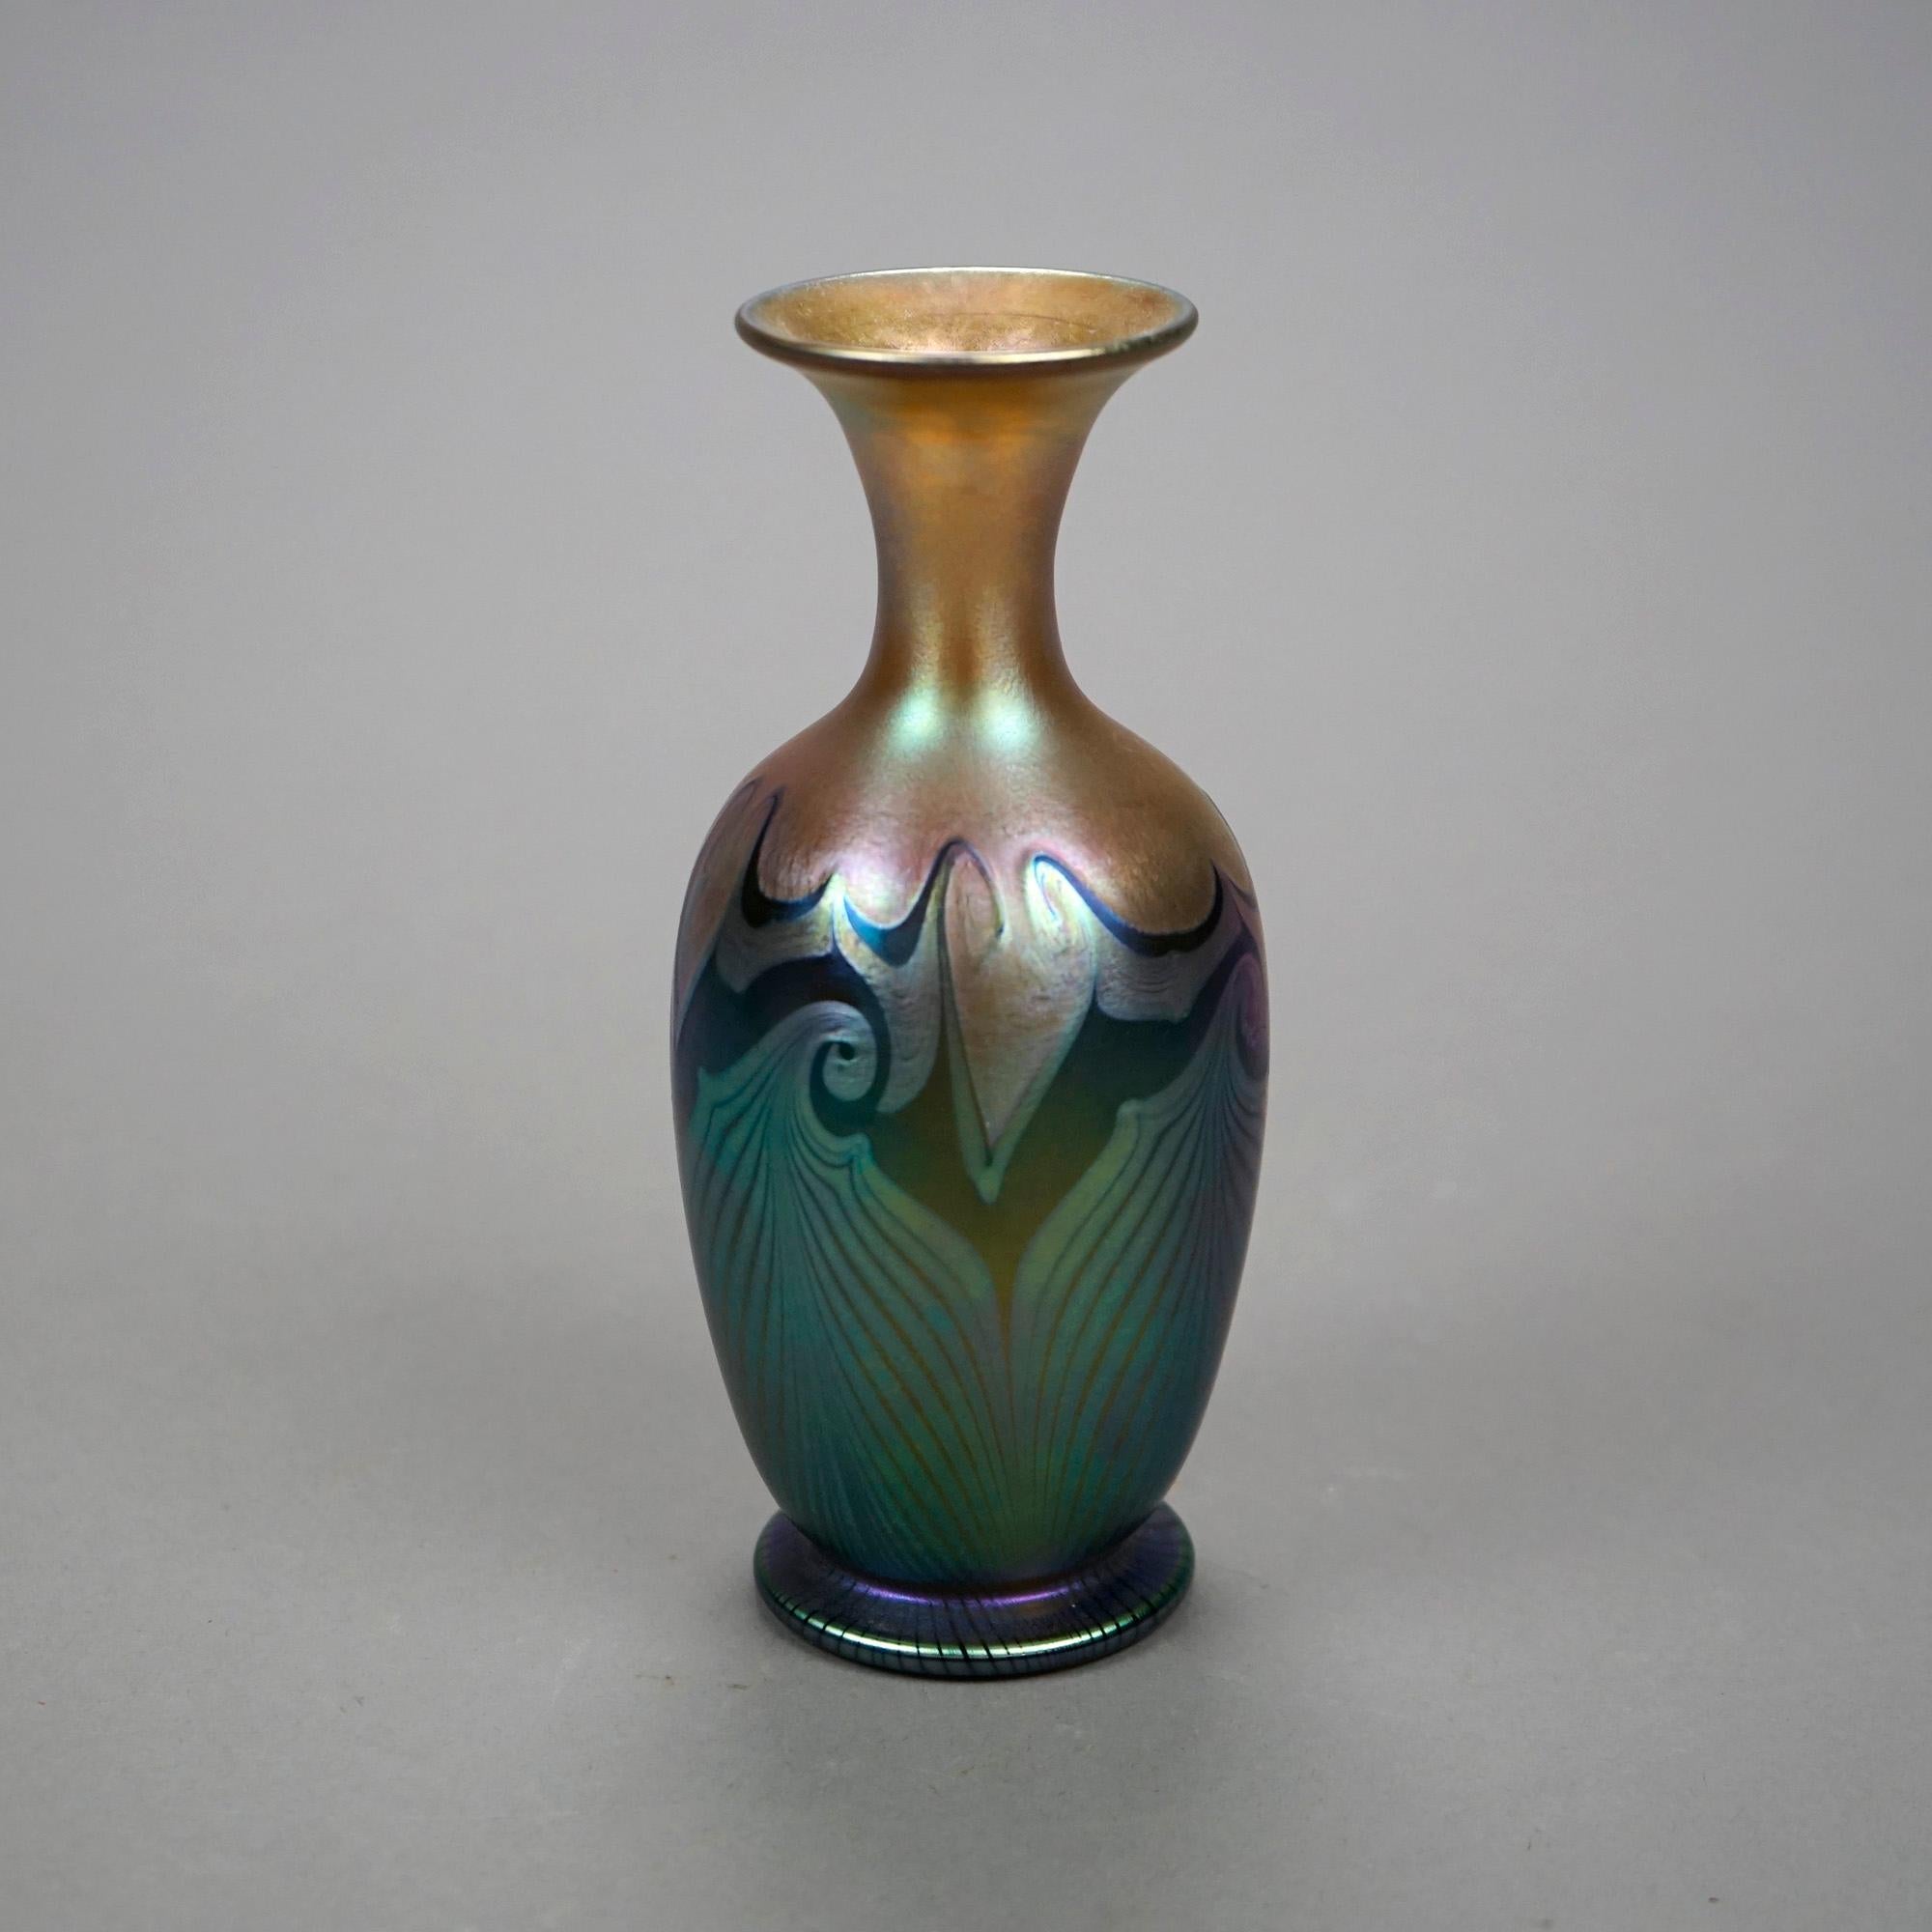 An antique Art Nouveau vase by Quezal offers art glass construction in pulled feather design, signed on base as photographed, c1920

Measures- 6.75''H x 3''W x 3''D

Catalogue Note: Ask about DISCOUNTED DELIVERY RATES available to most regions